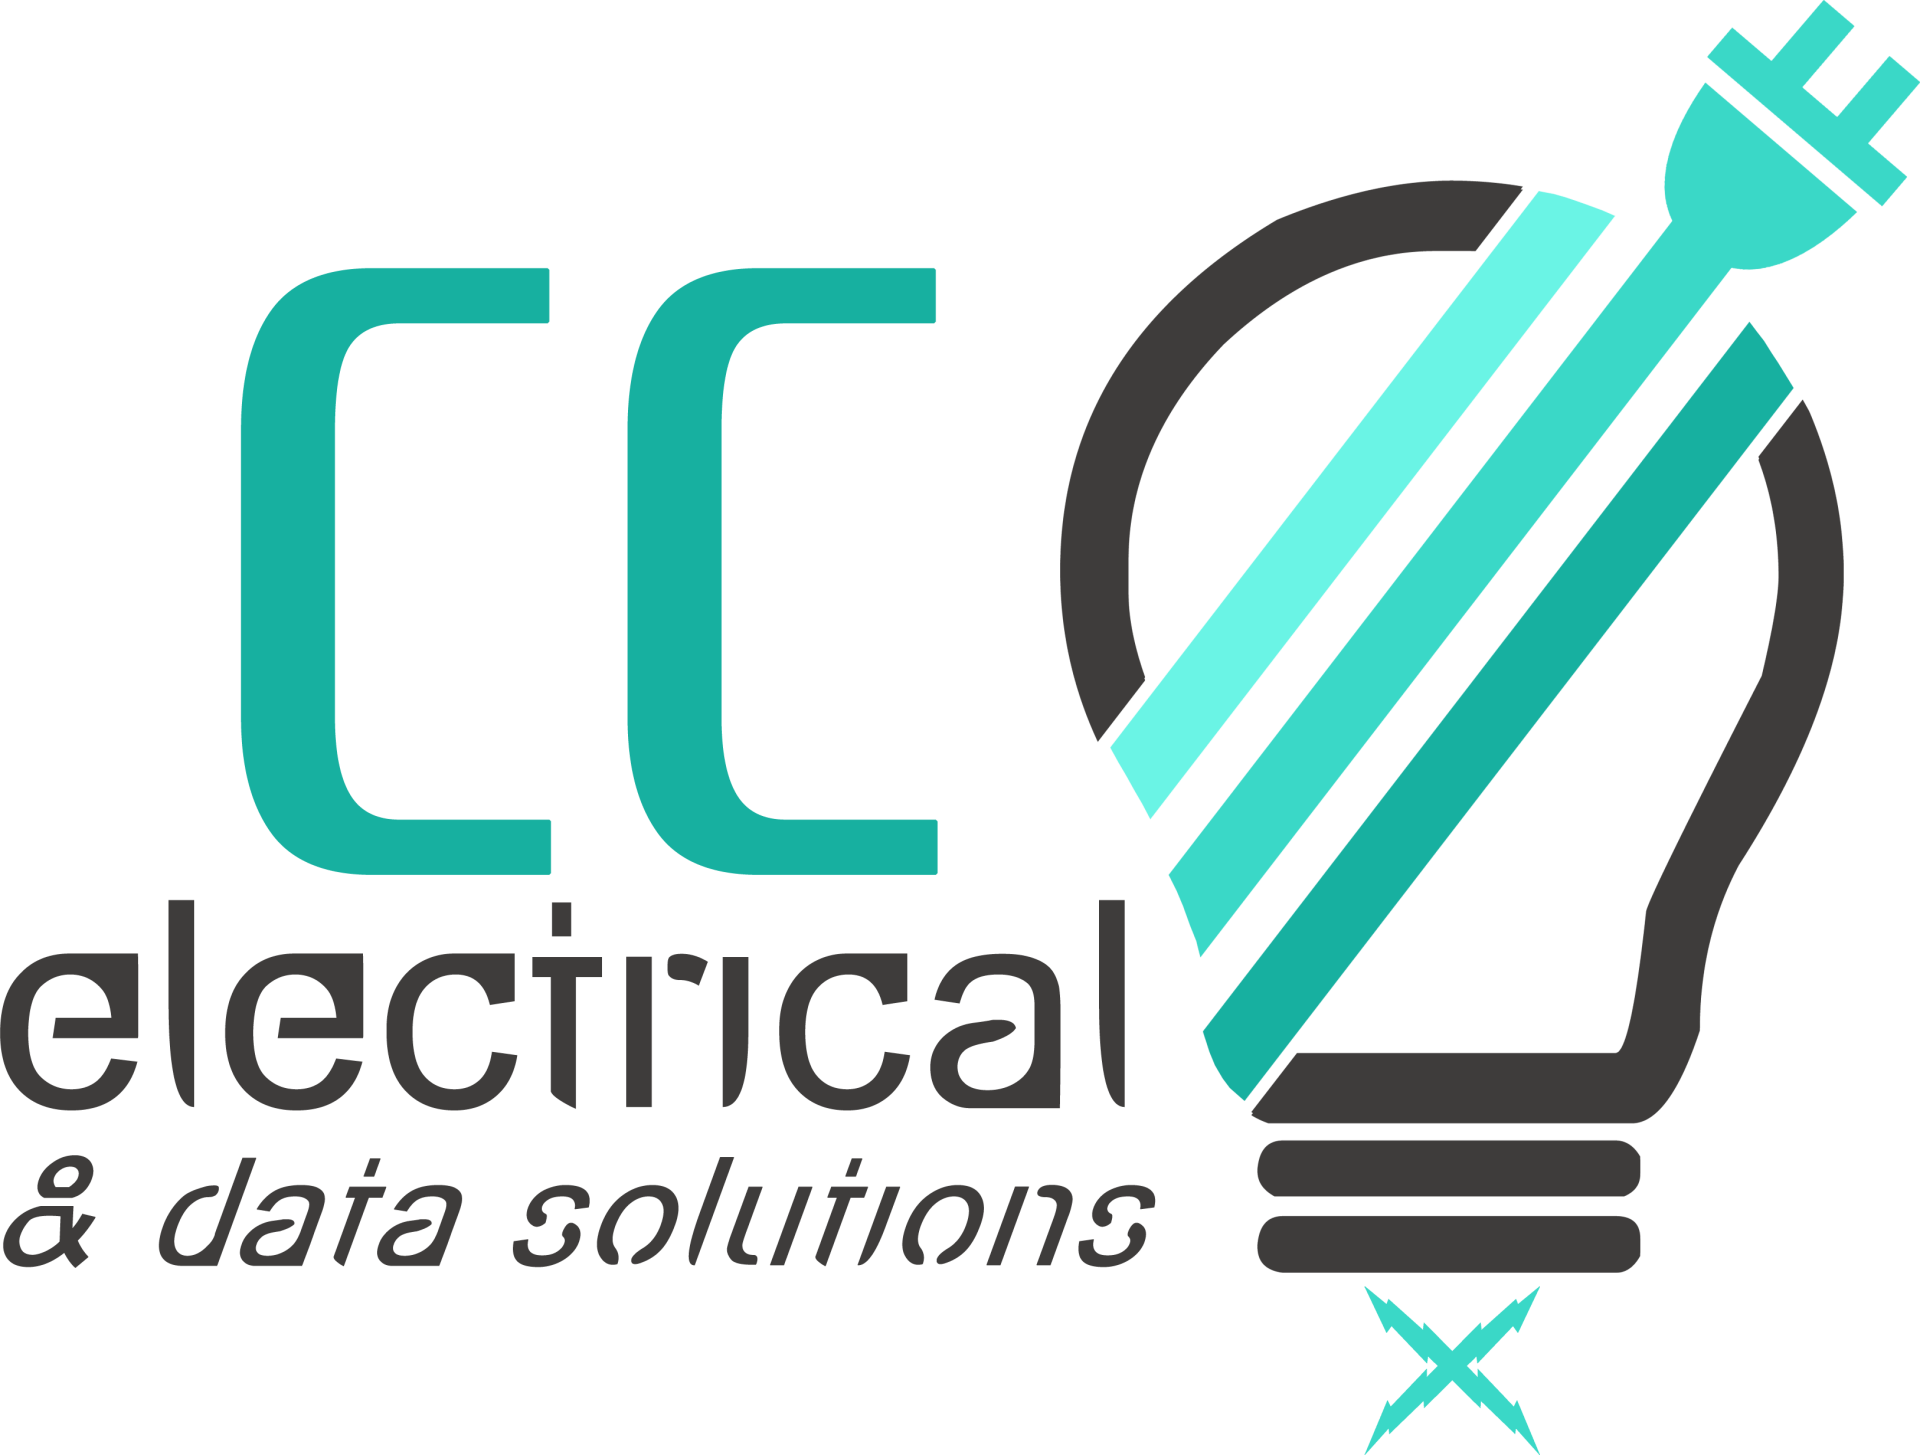 CC Electrical & Data Solutions Are Electricians in Bundaberg